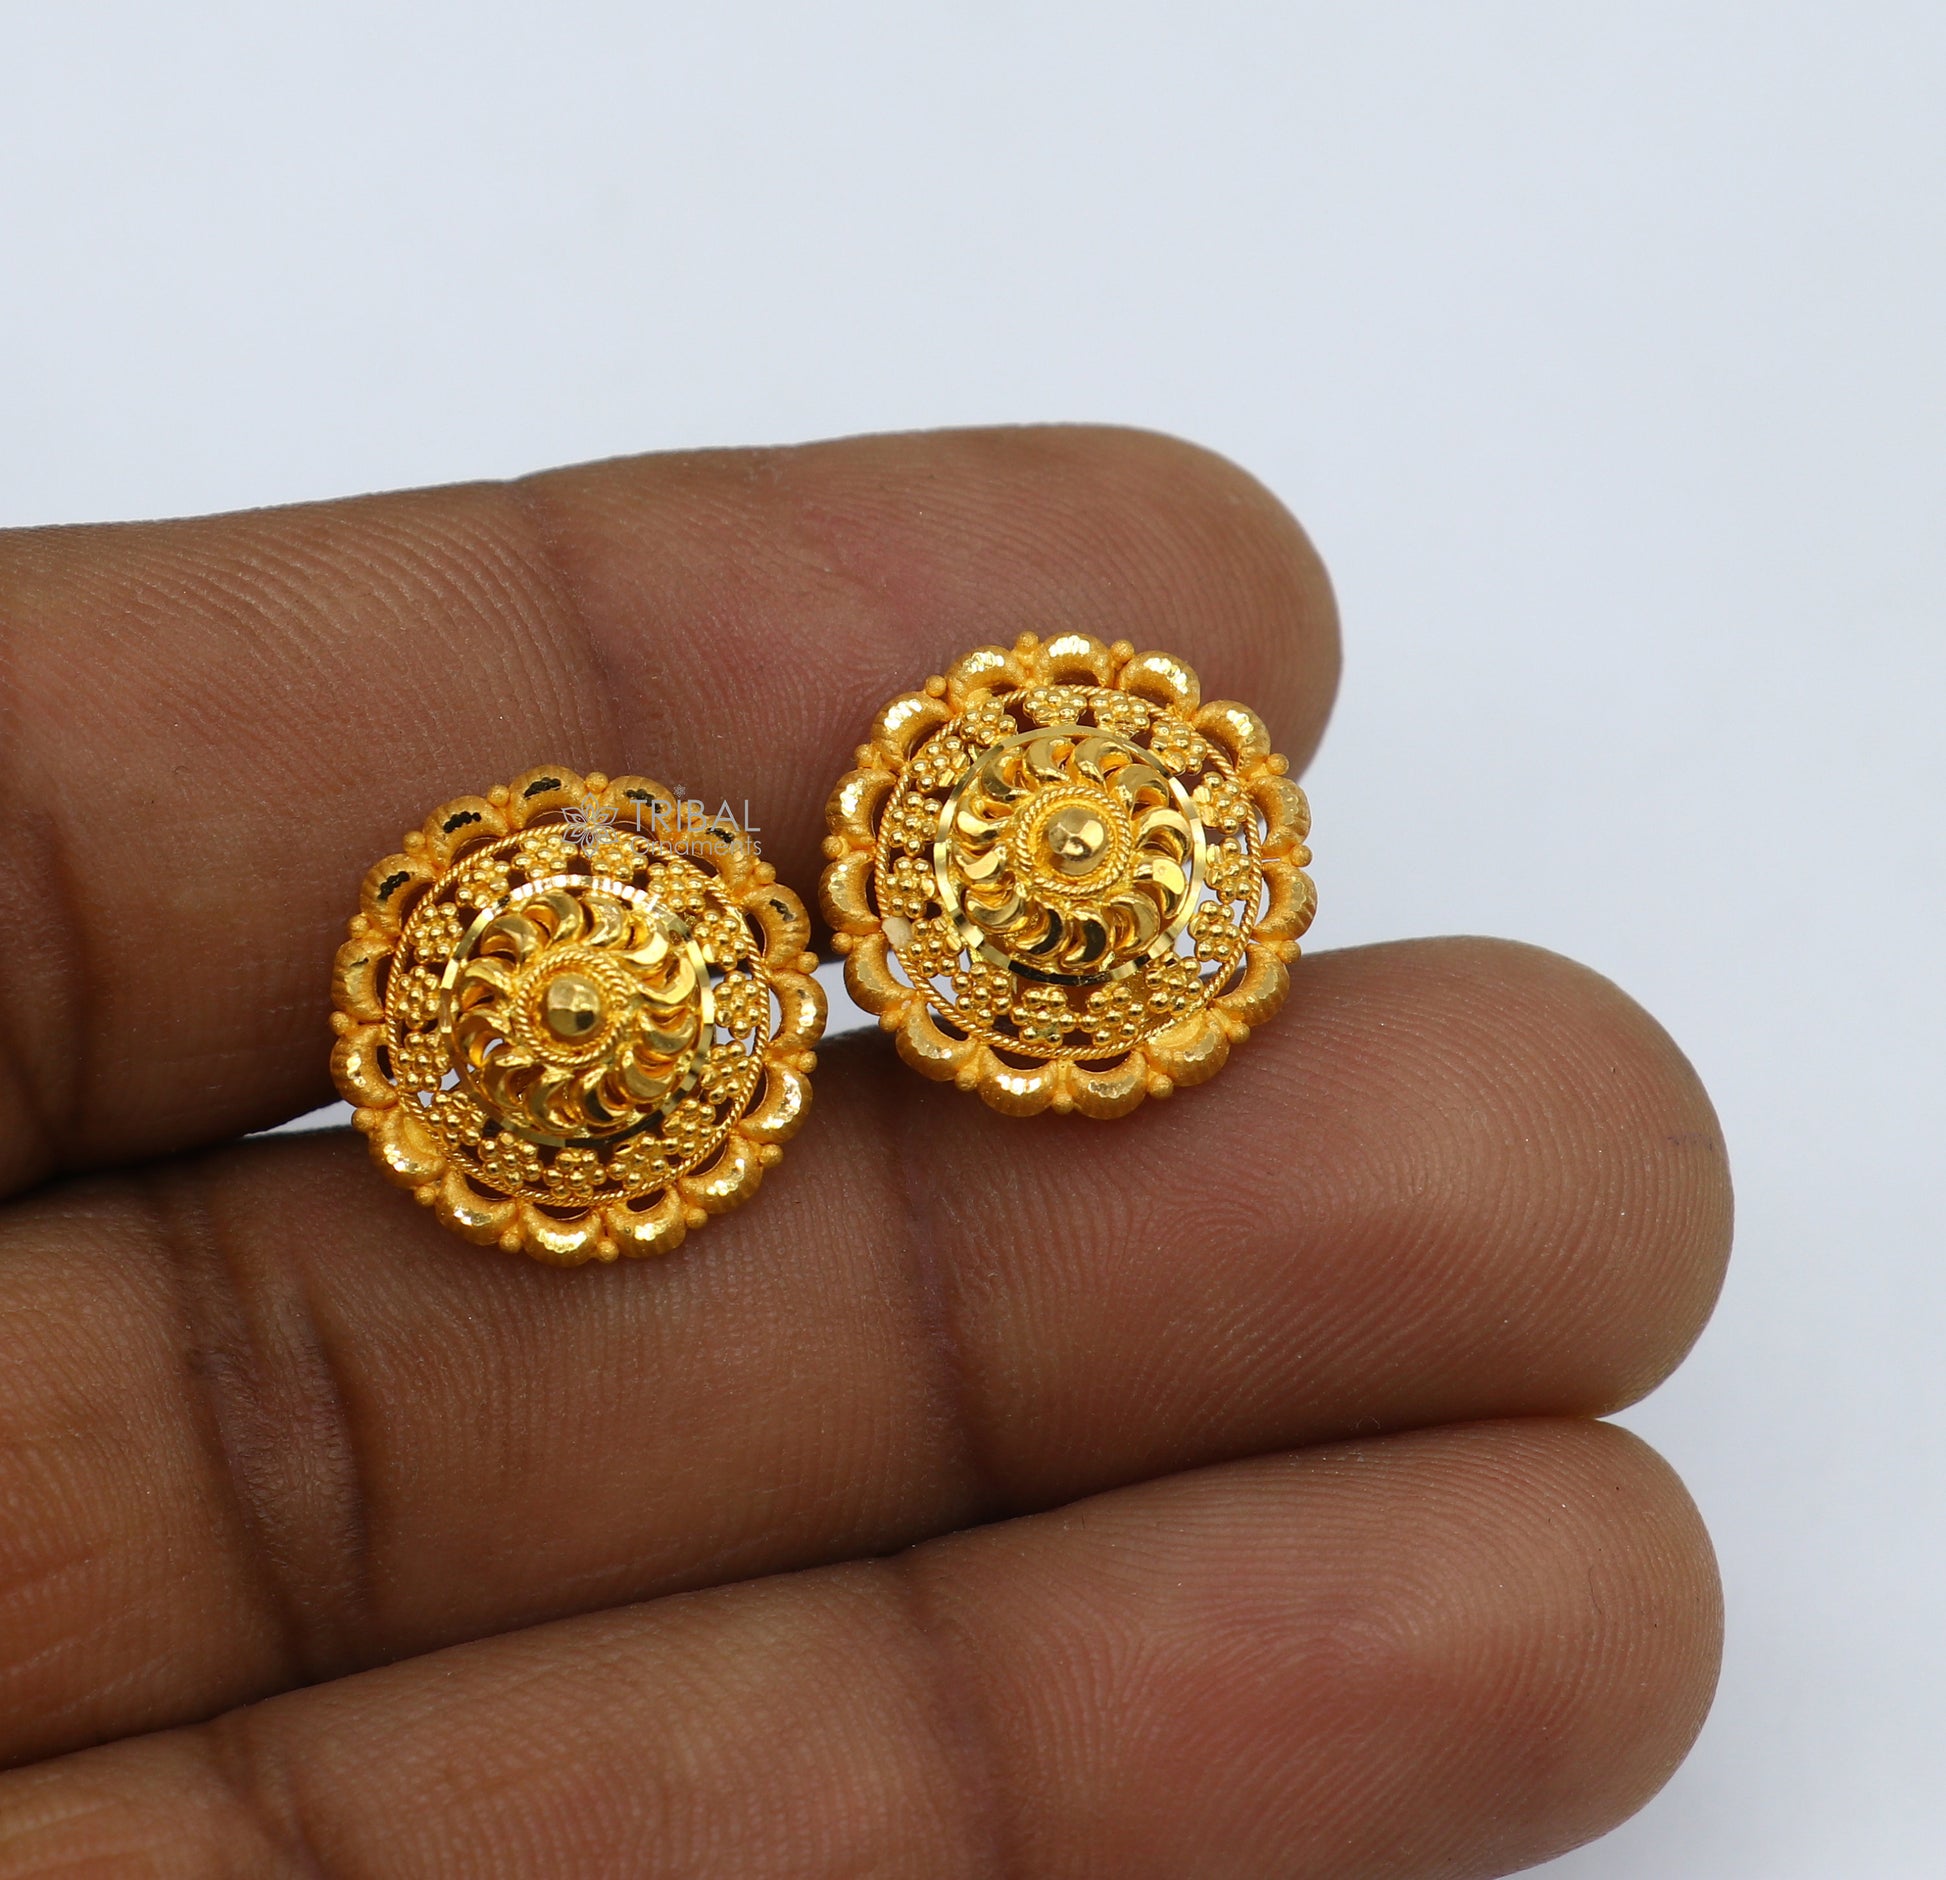 Indian traditional cultural round design 22Kt yellow gold handmade amazing filigree work girl's women's stud earrings jewelry er184 - TRIBAL ORNAMENTS